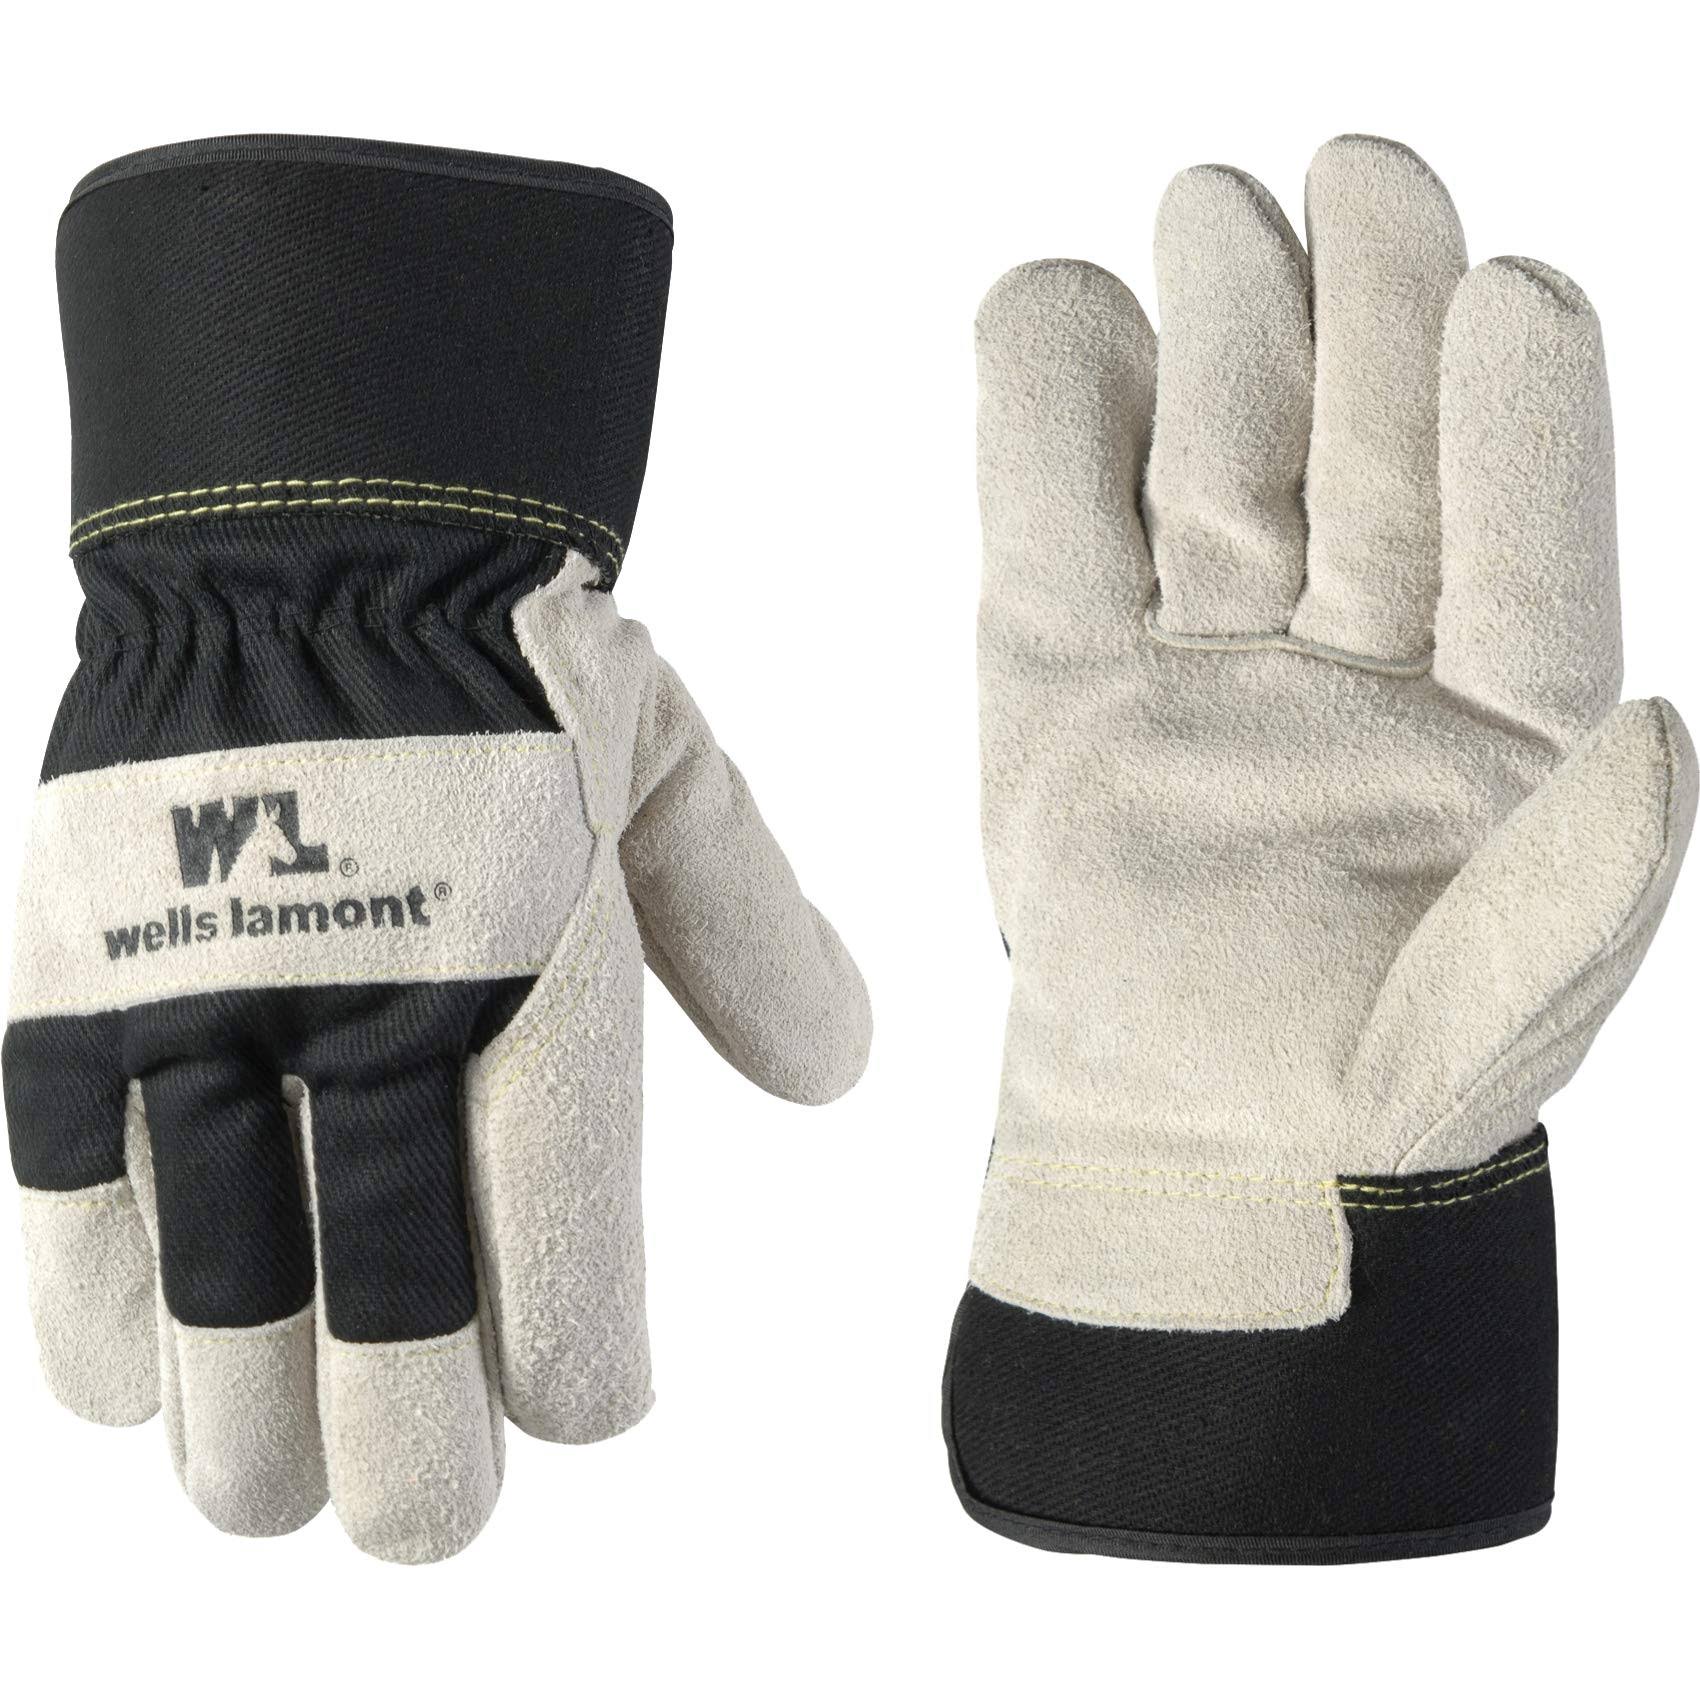 Wells Lamont 5130L Work Gloves - With Palomino Suede Cowhide, Safety Cuff, C100 Thinsulate, Large